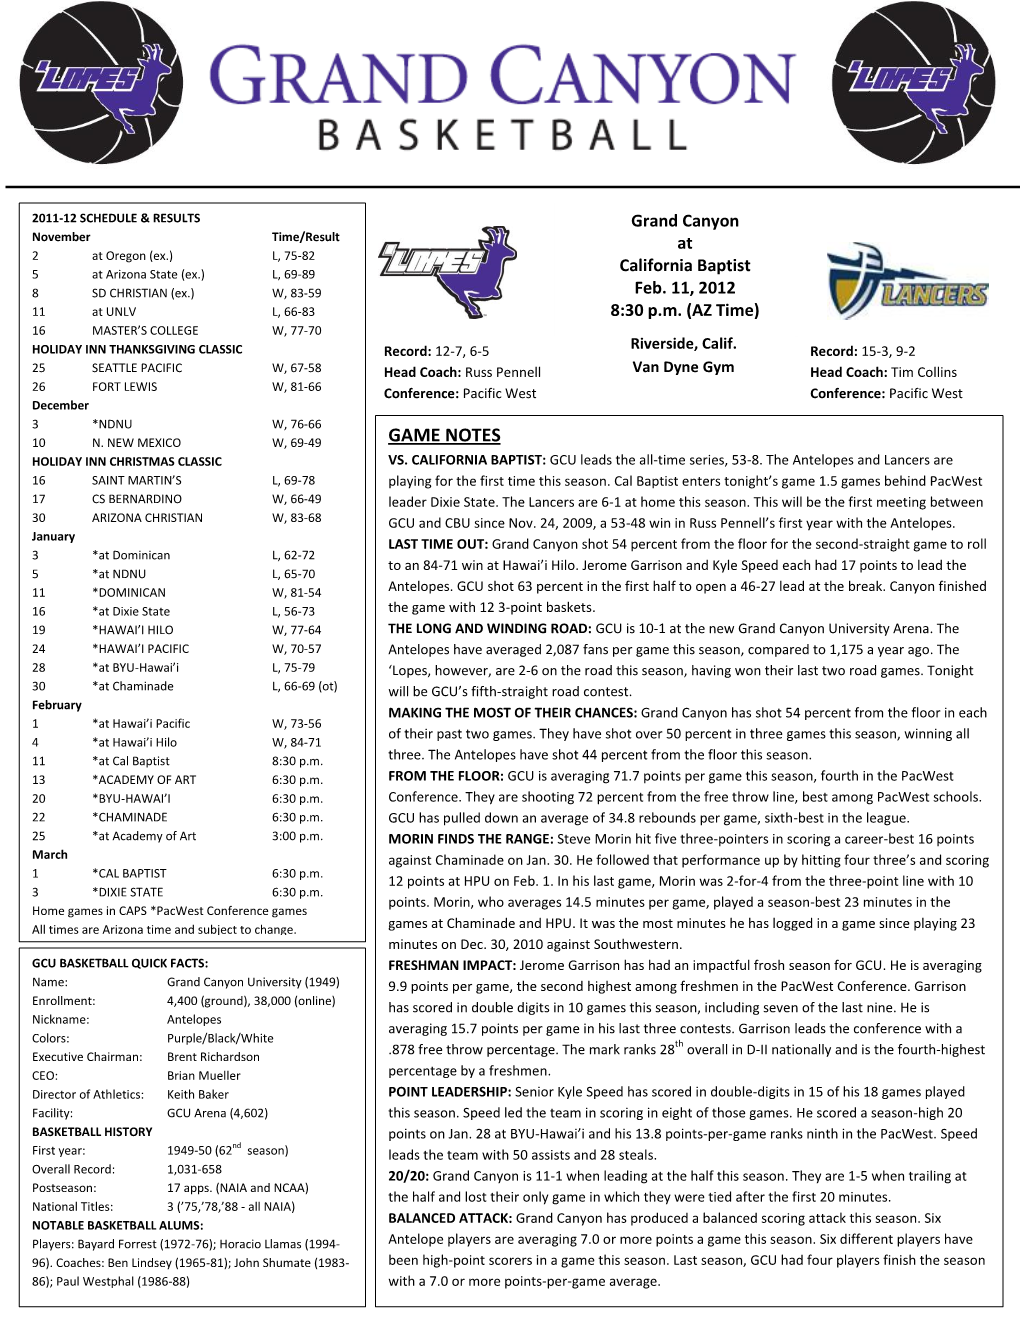 Game Notes Holiday Inn Christmas Classic Vs